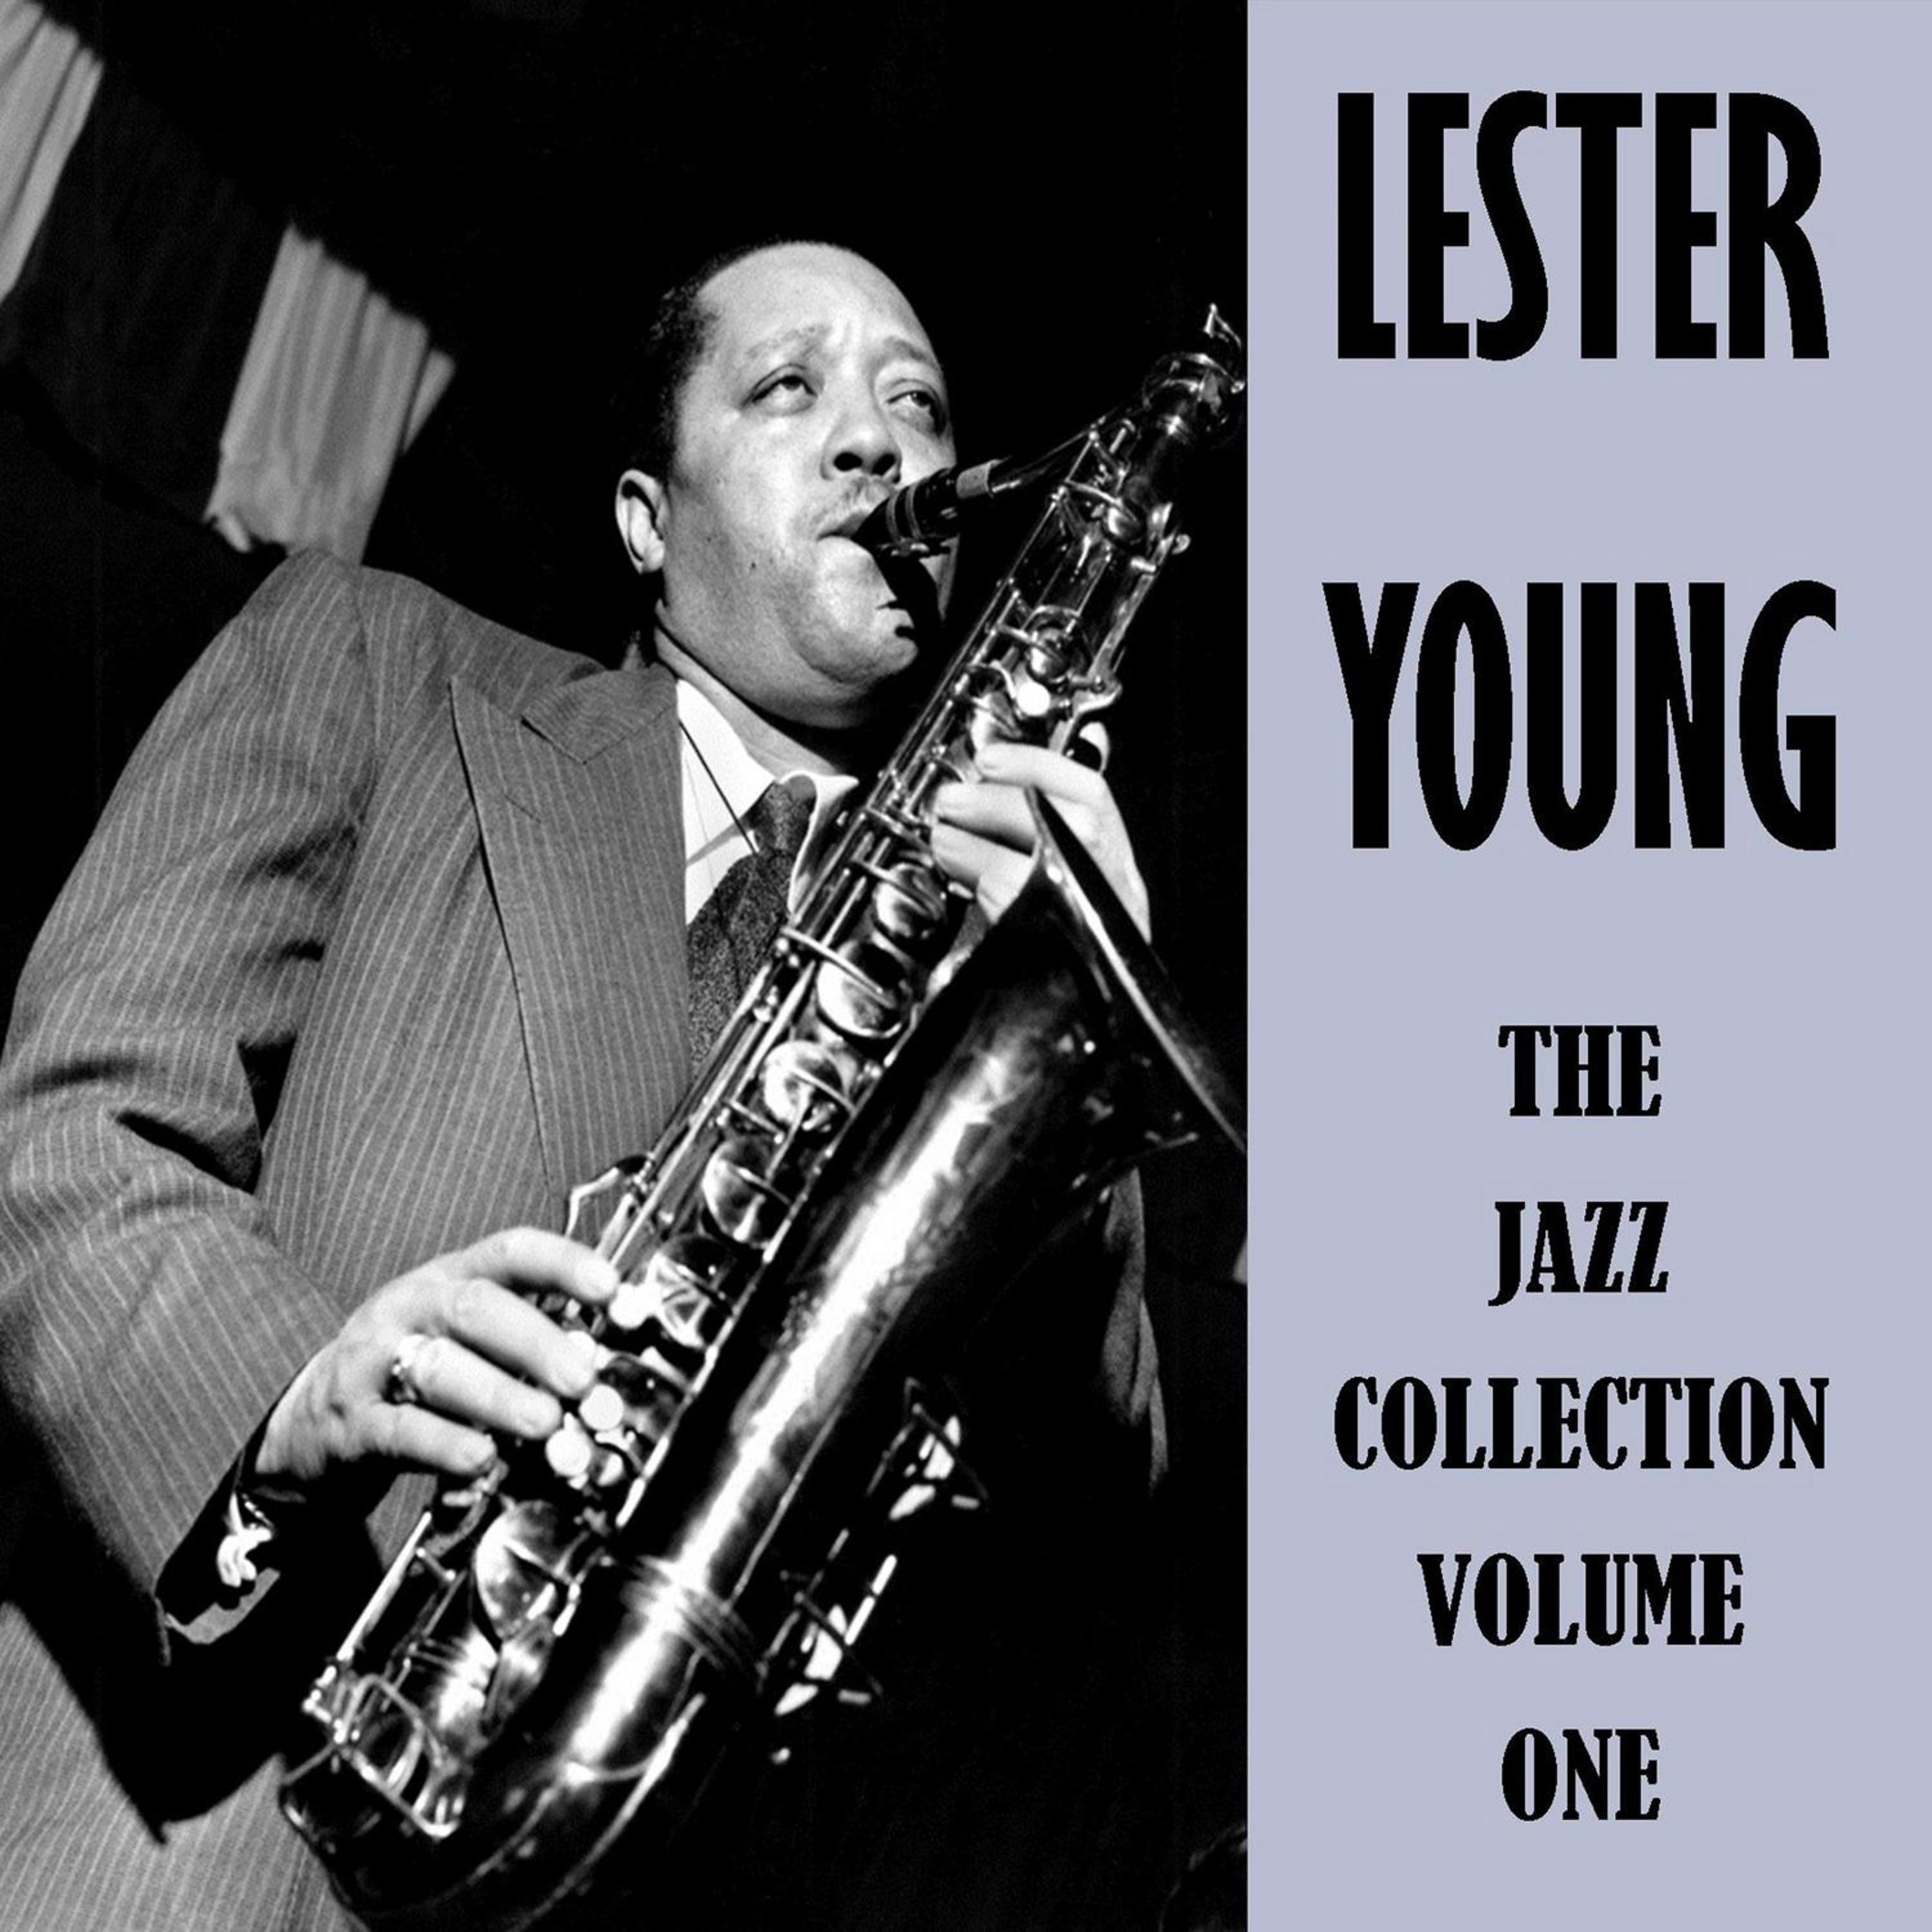 The Lester young-Teddy Wilson Quartet – pres and Teddy. Lester young, Teddy Wilson Quartet - pres and Teddy CD. Arne Domnerus Group - Jazz at the pawnshop 2.